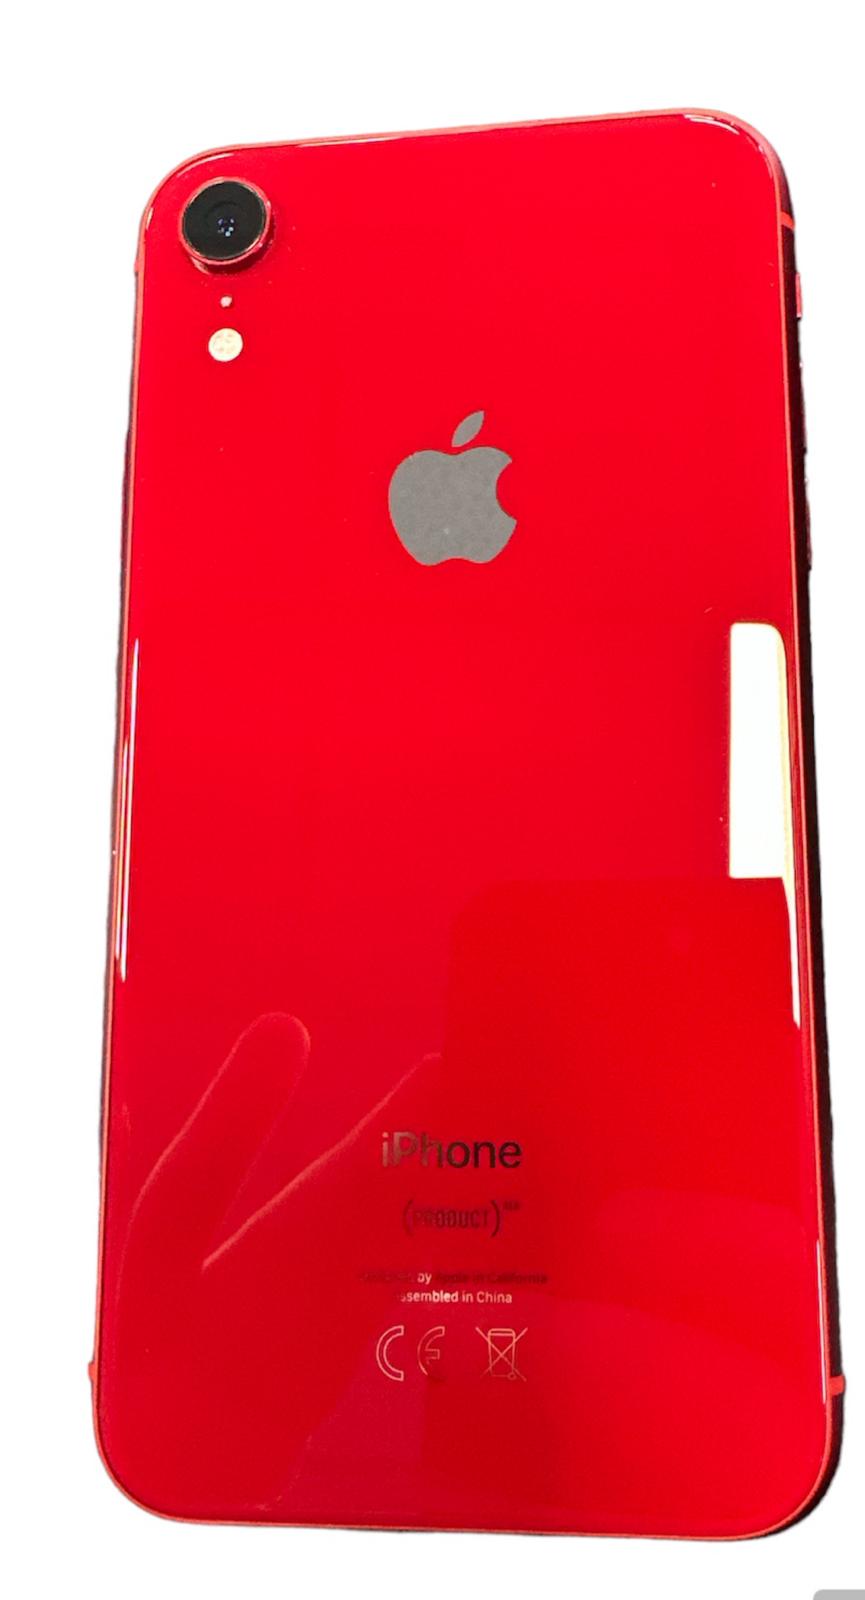 Apple iPhone XR 64GB Product Red, Unlocked